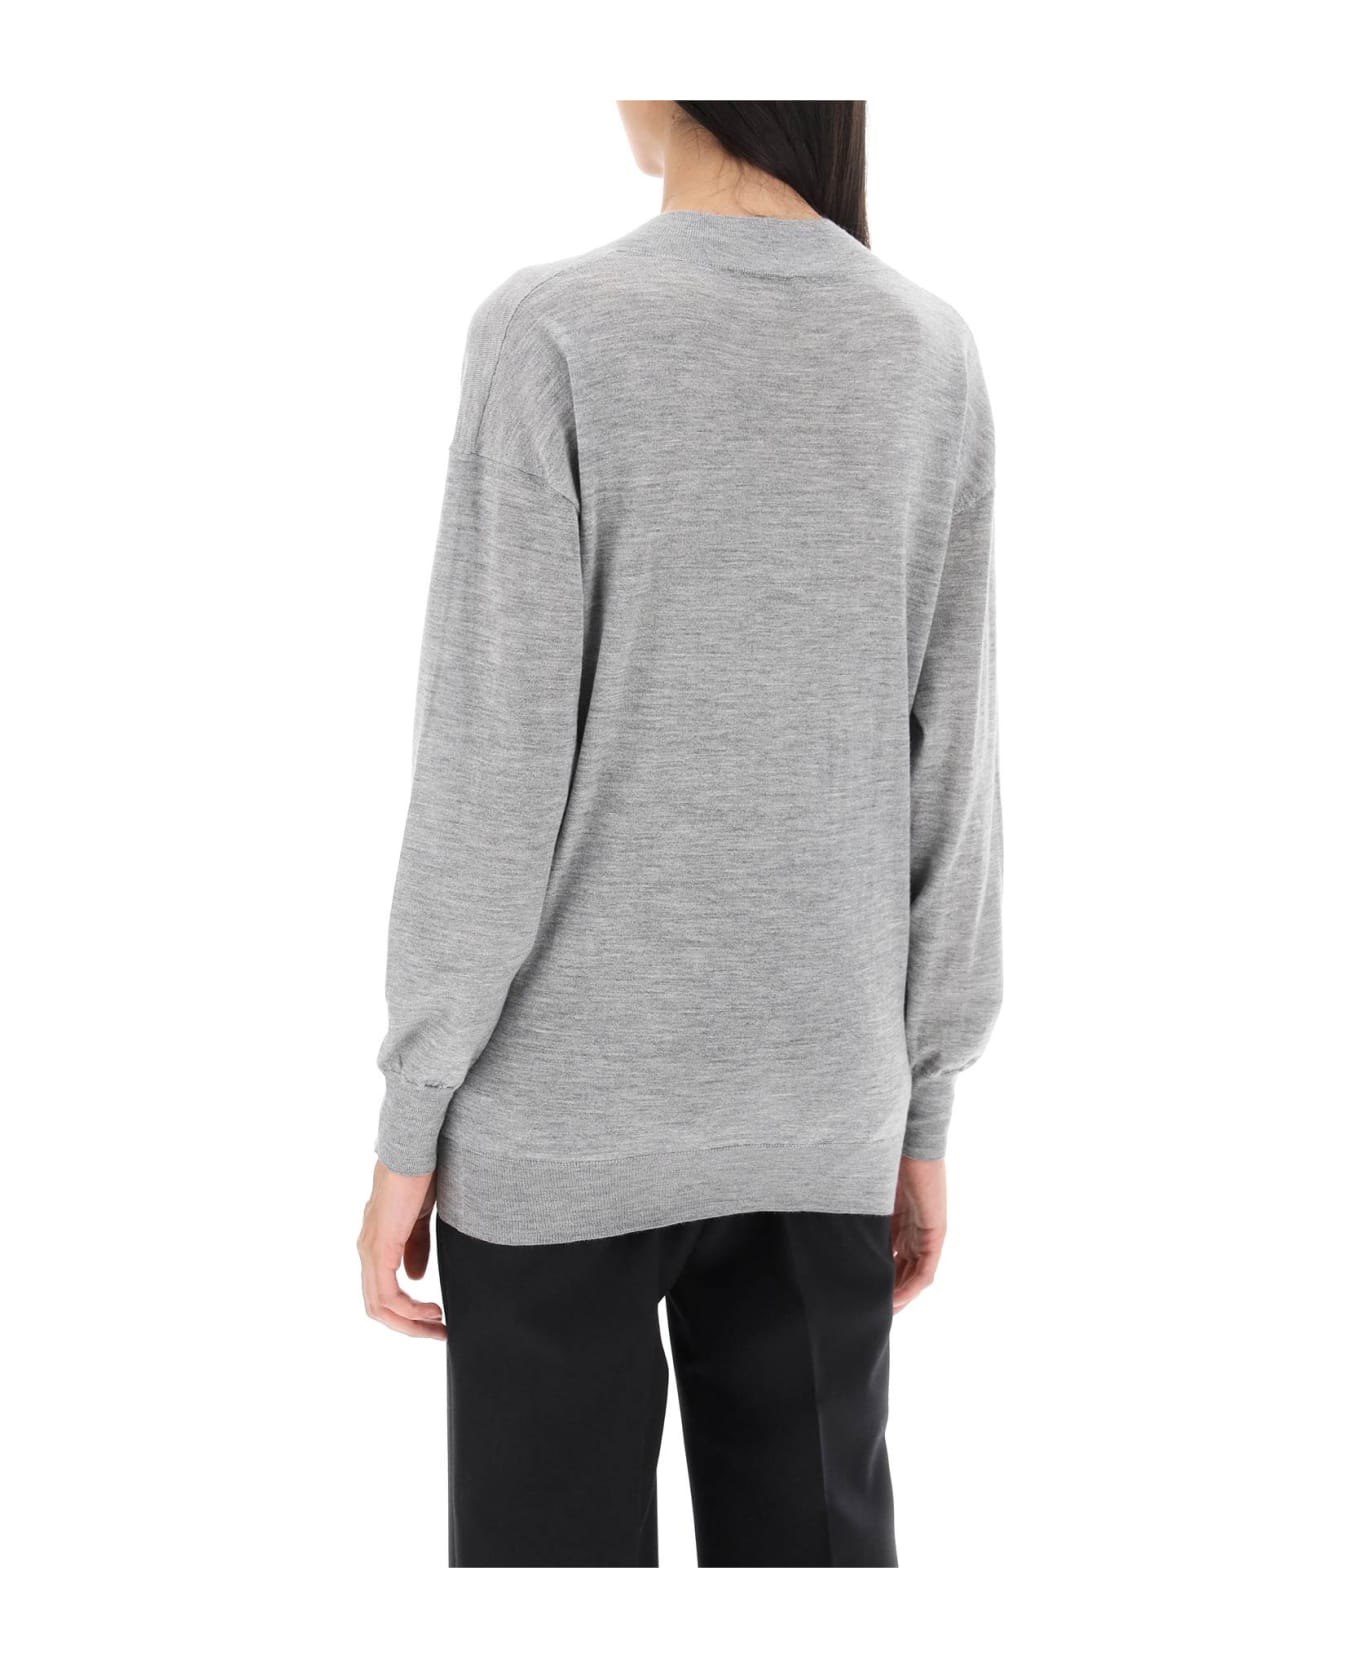 Tom Ford Sweater In Cashmere And Silk - GREY MELANGE (Grey)